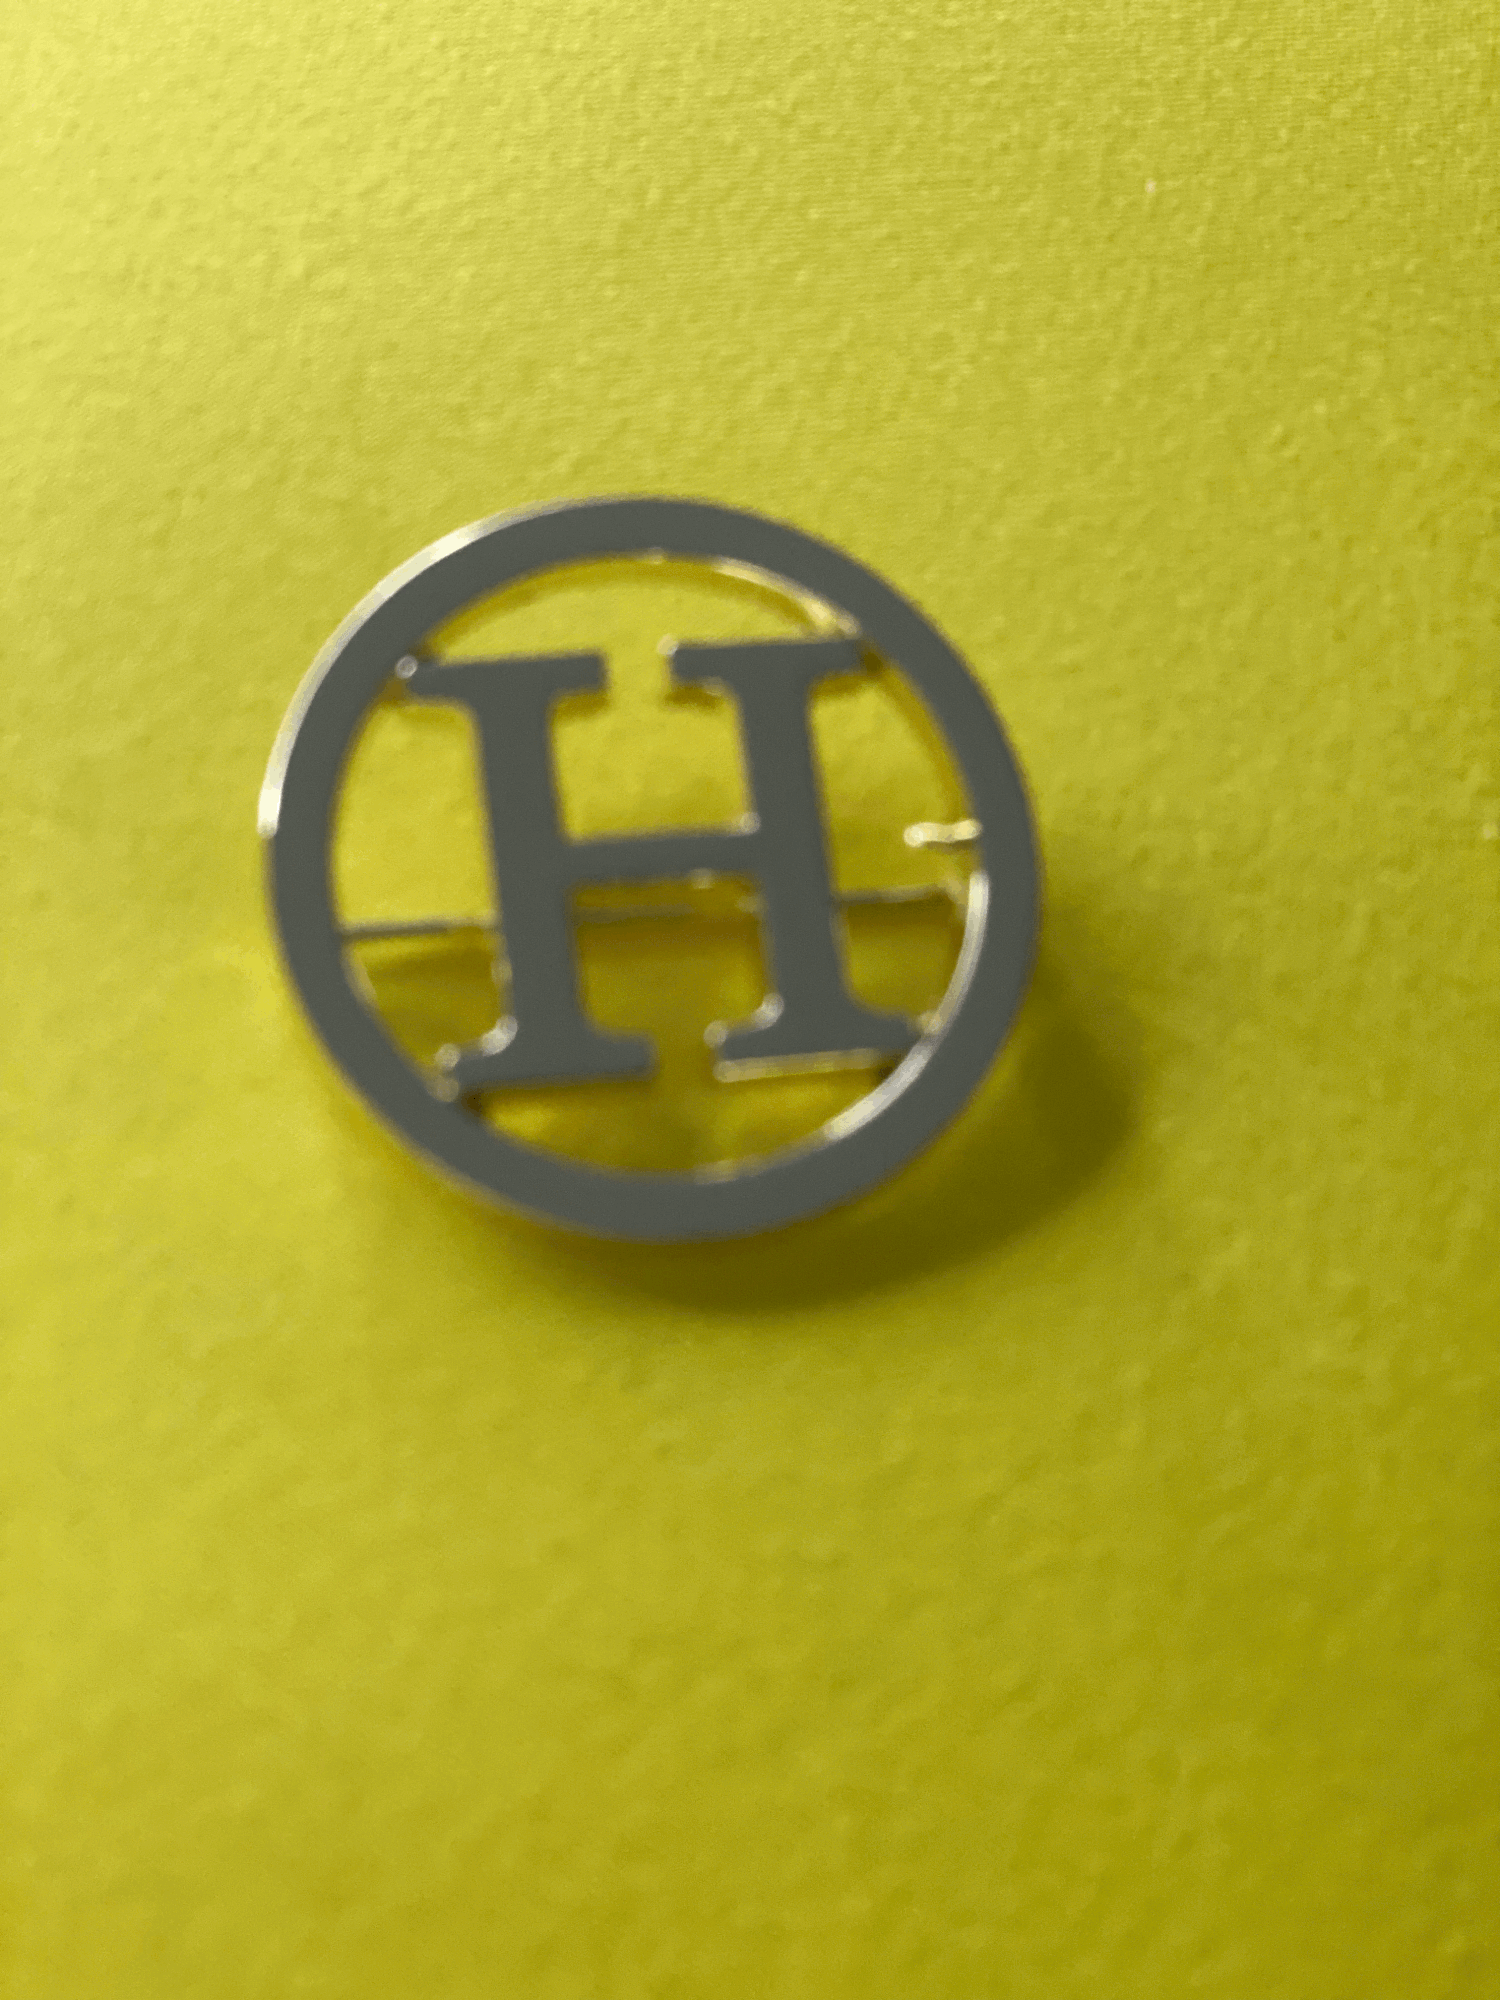 Pin on Hermes Collection